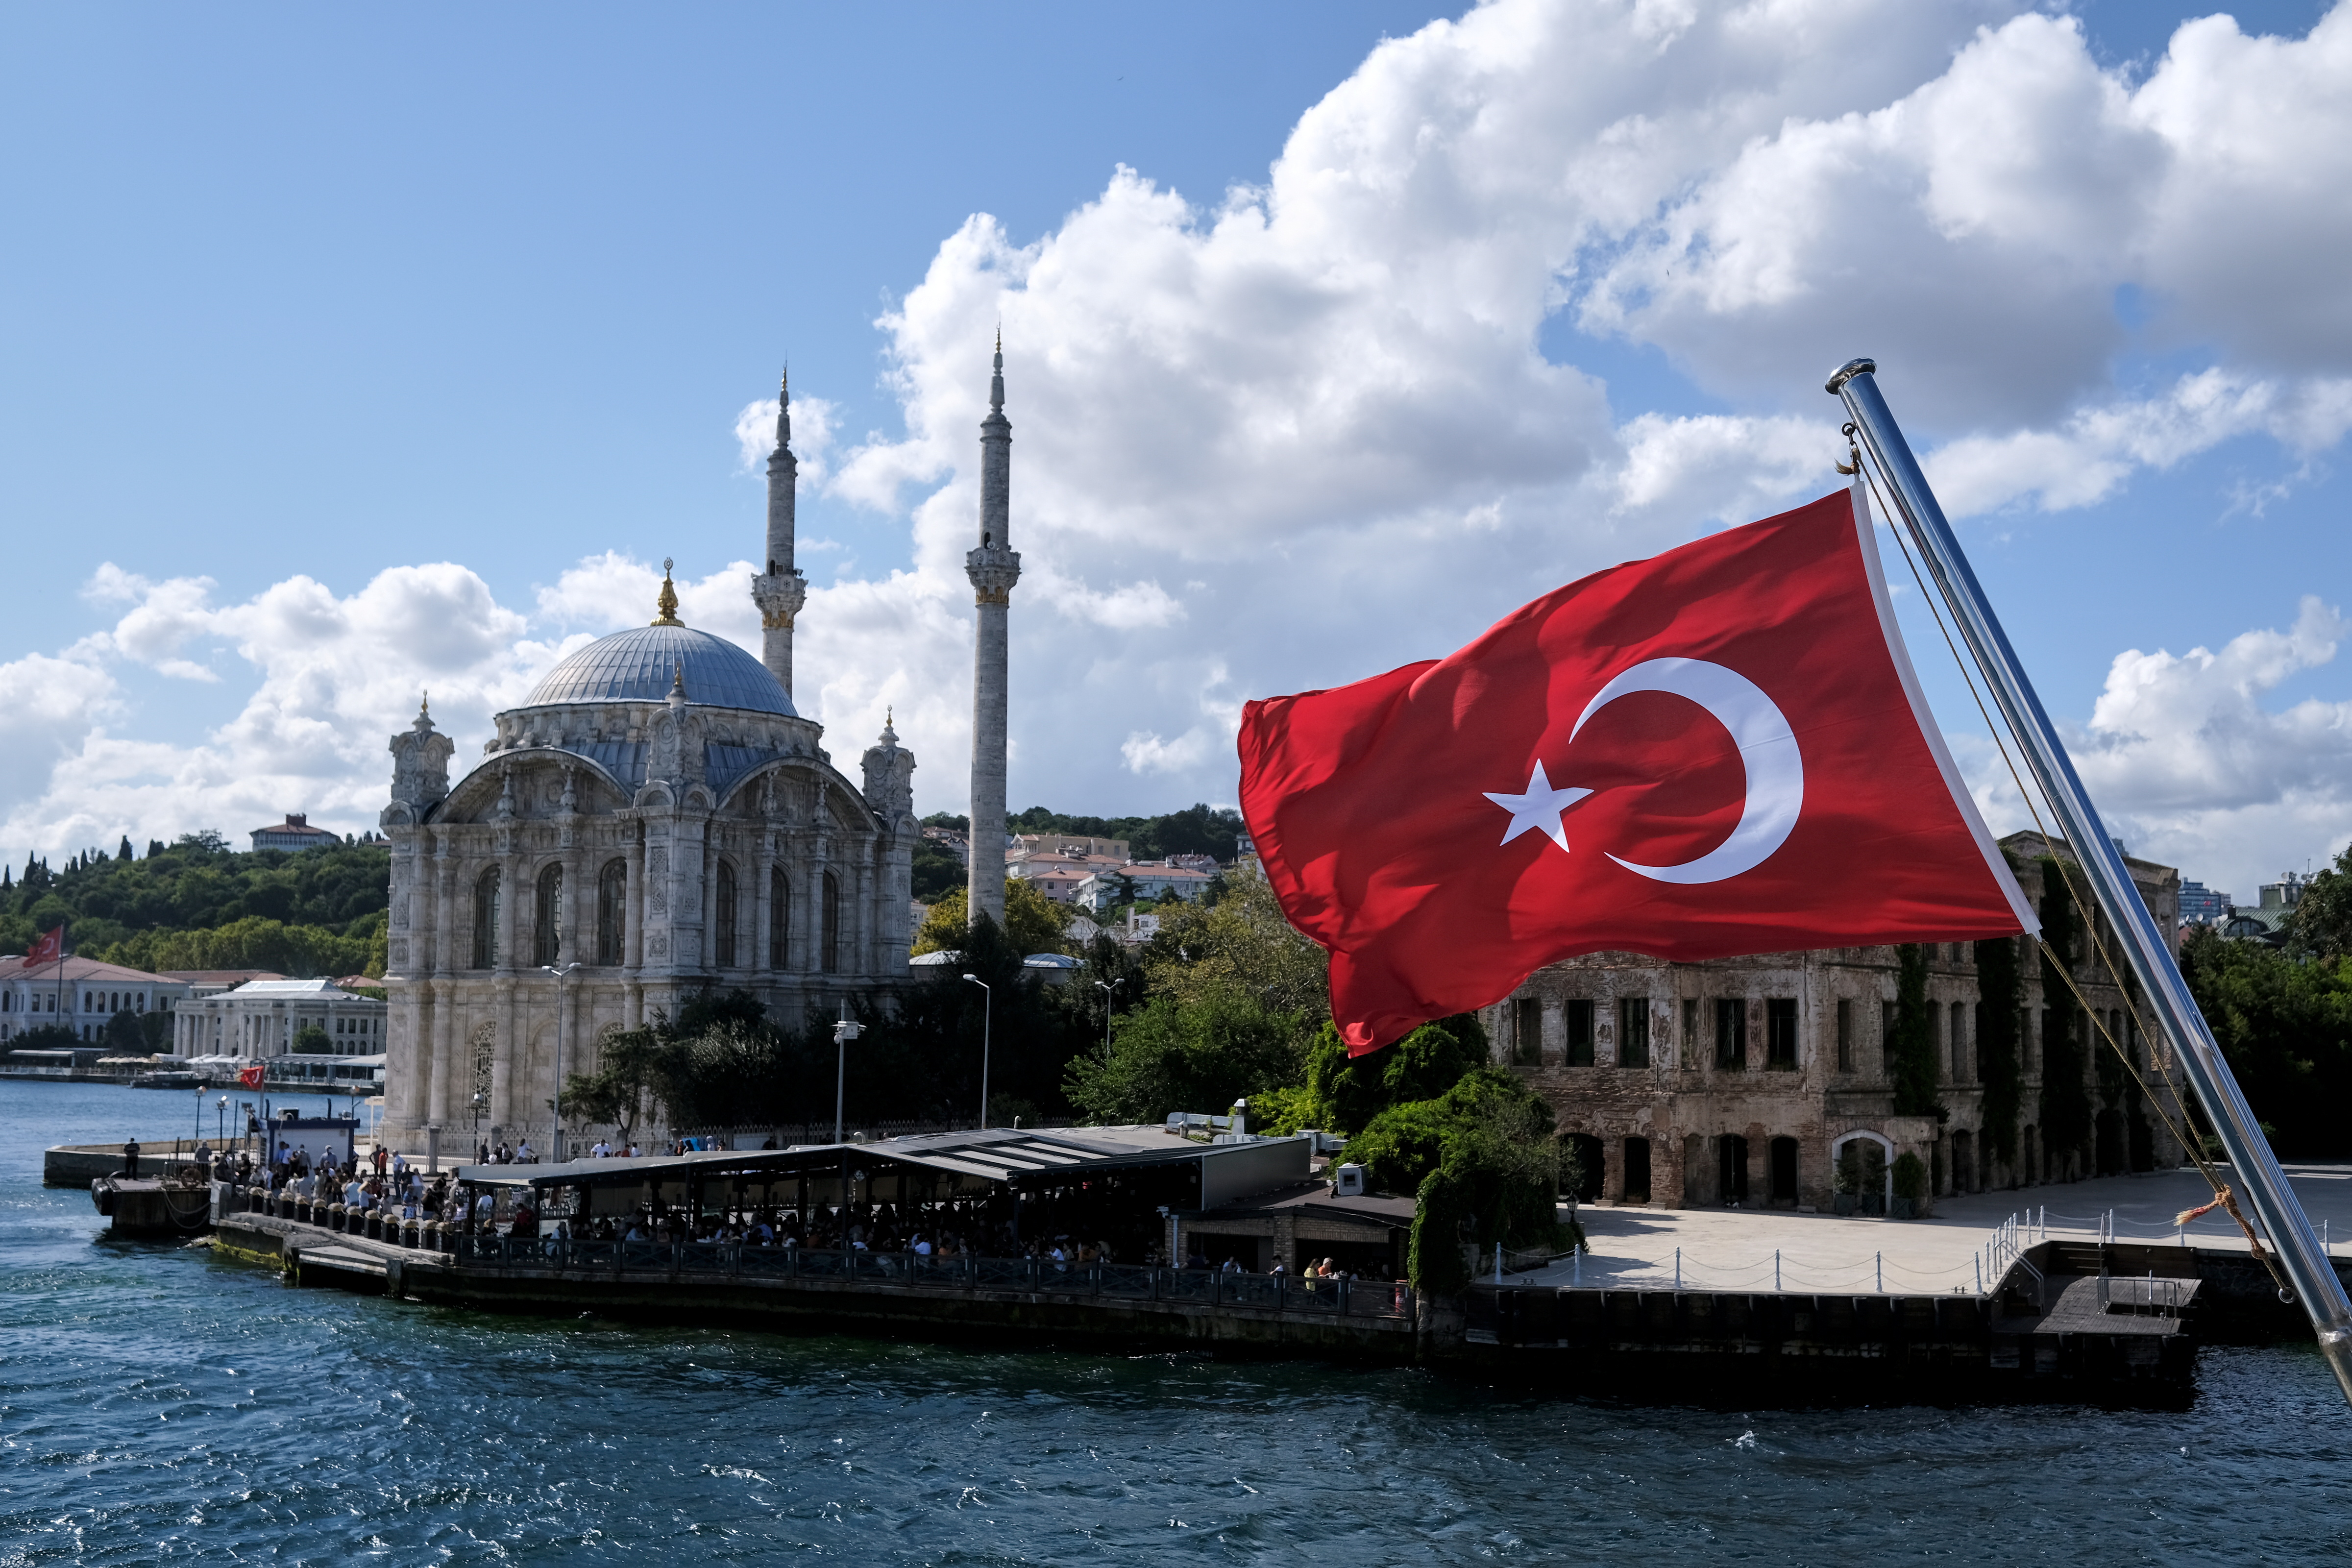 A Turkish flag is pictured on a boat with the Ortakoy Mosque in the background in Istanbul, Turkey September 5, 2021. REUTERS/Murad Sezer